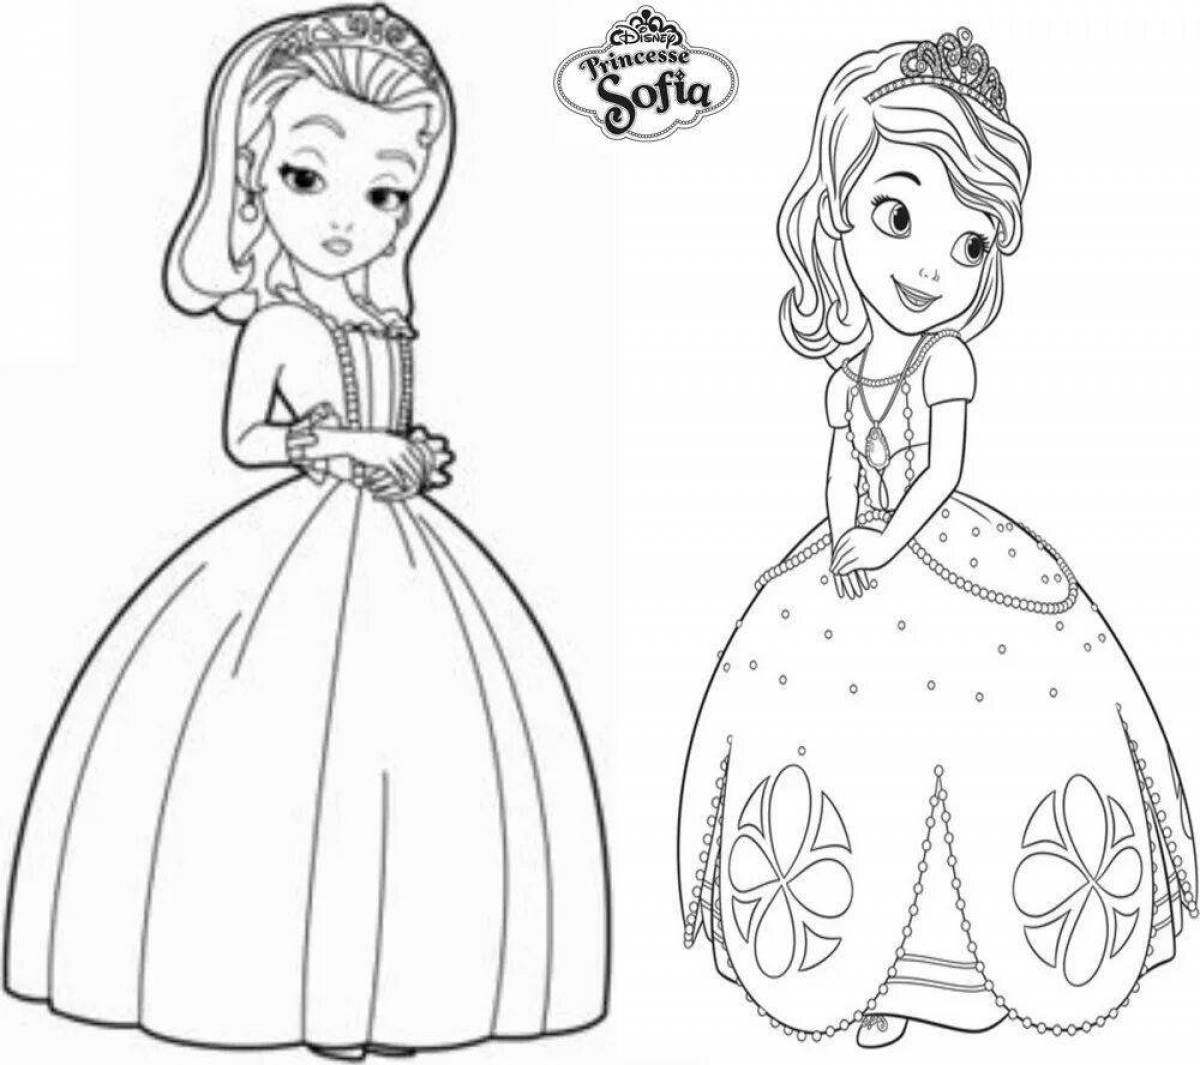 Amazing coloring book for girls